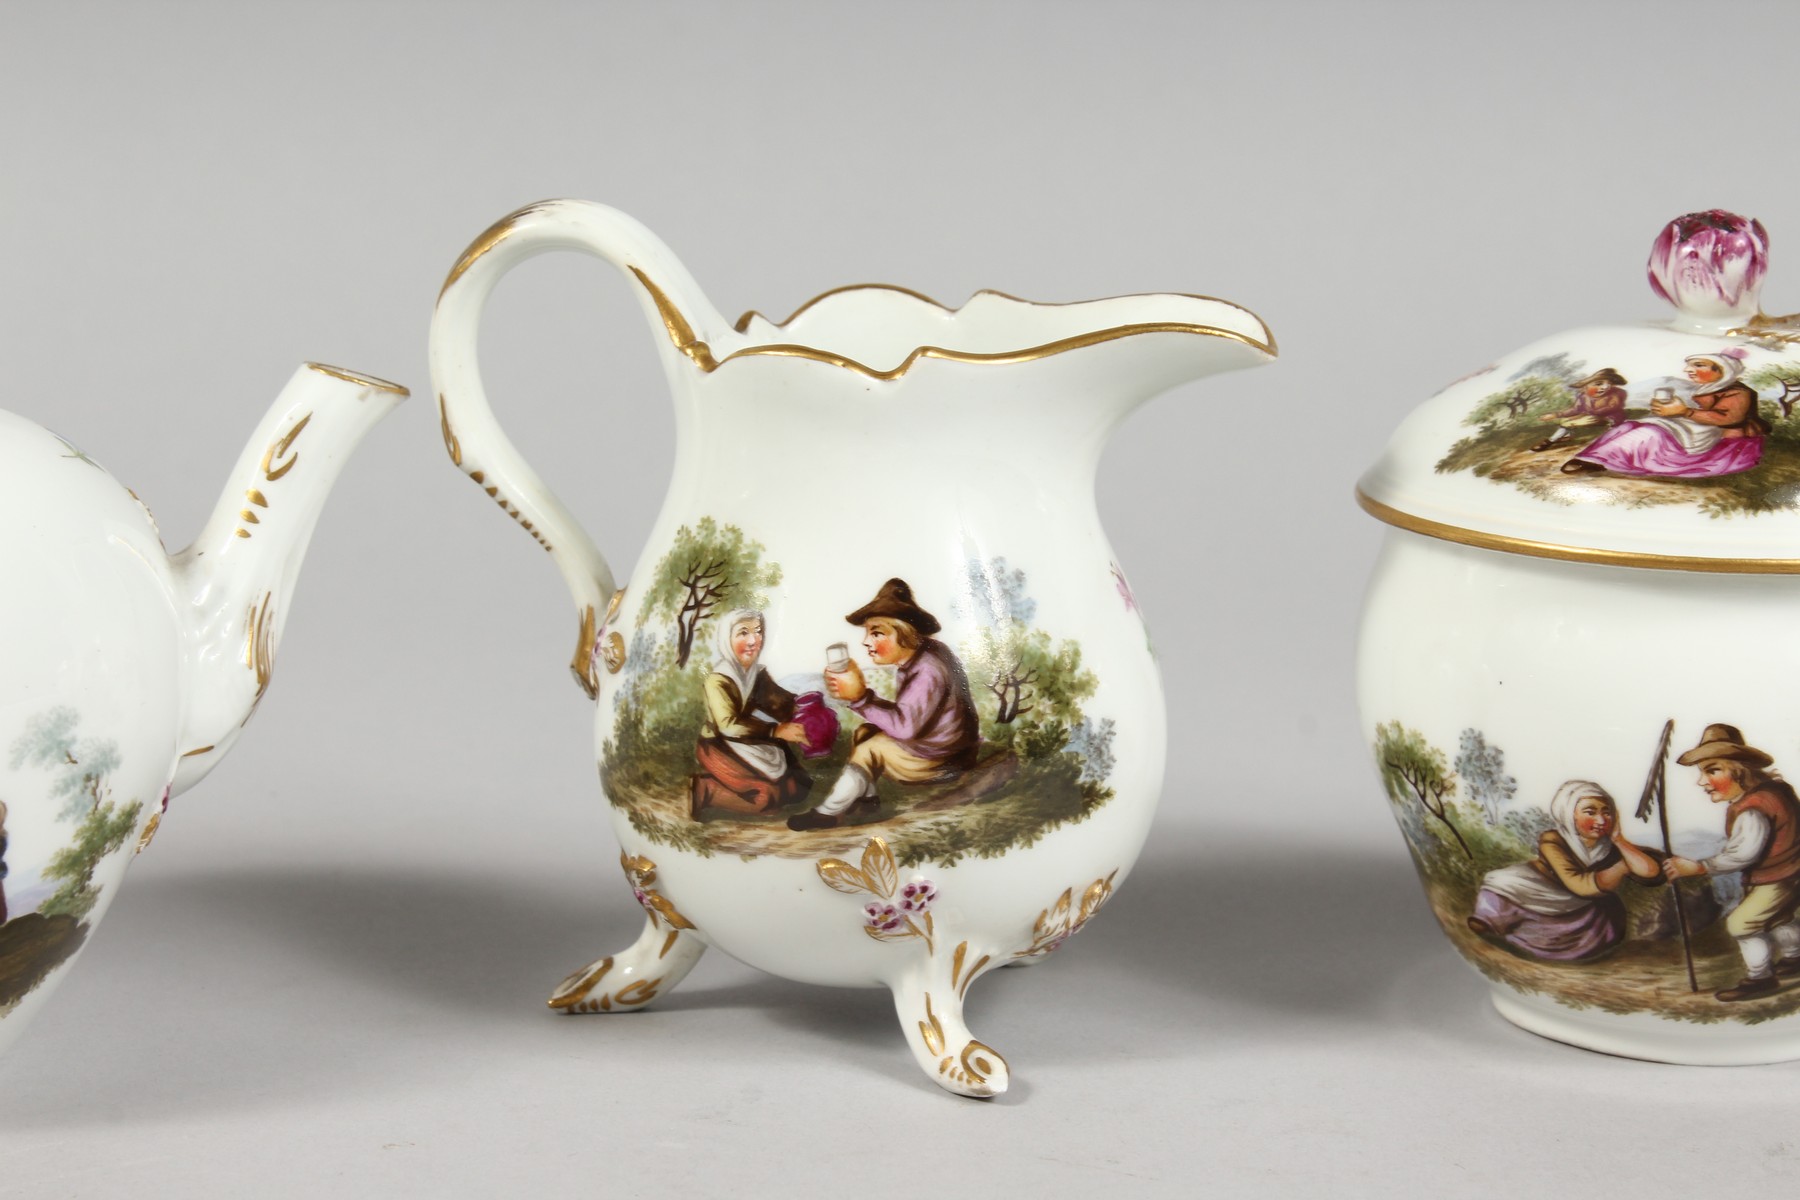 A SUPERB 18TH CENTURY MEISSEN PORCELAIN FOUR PIECE CABARET SET, with oval tray, teapot and cover, - Image 11 of 15